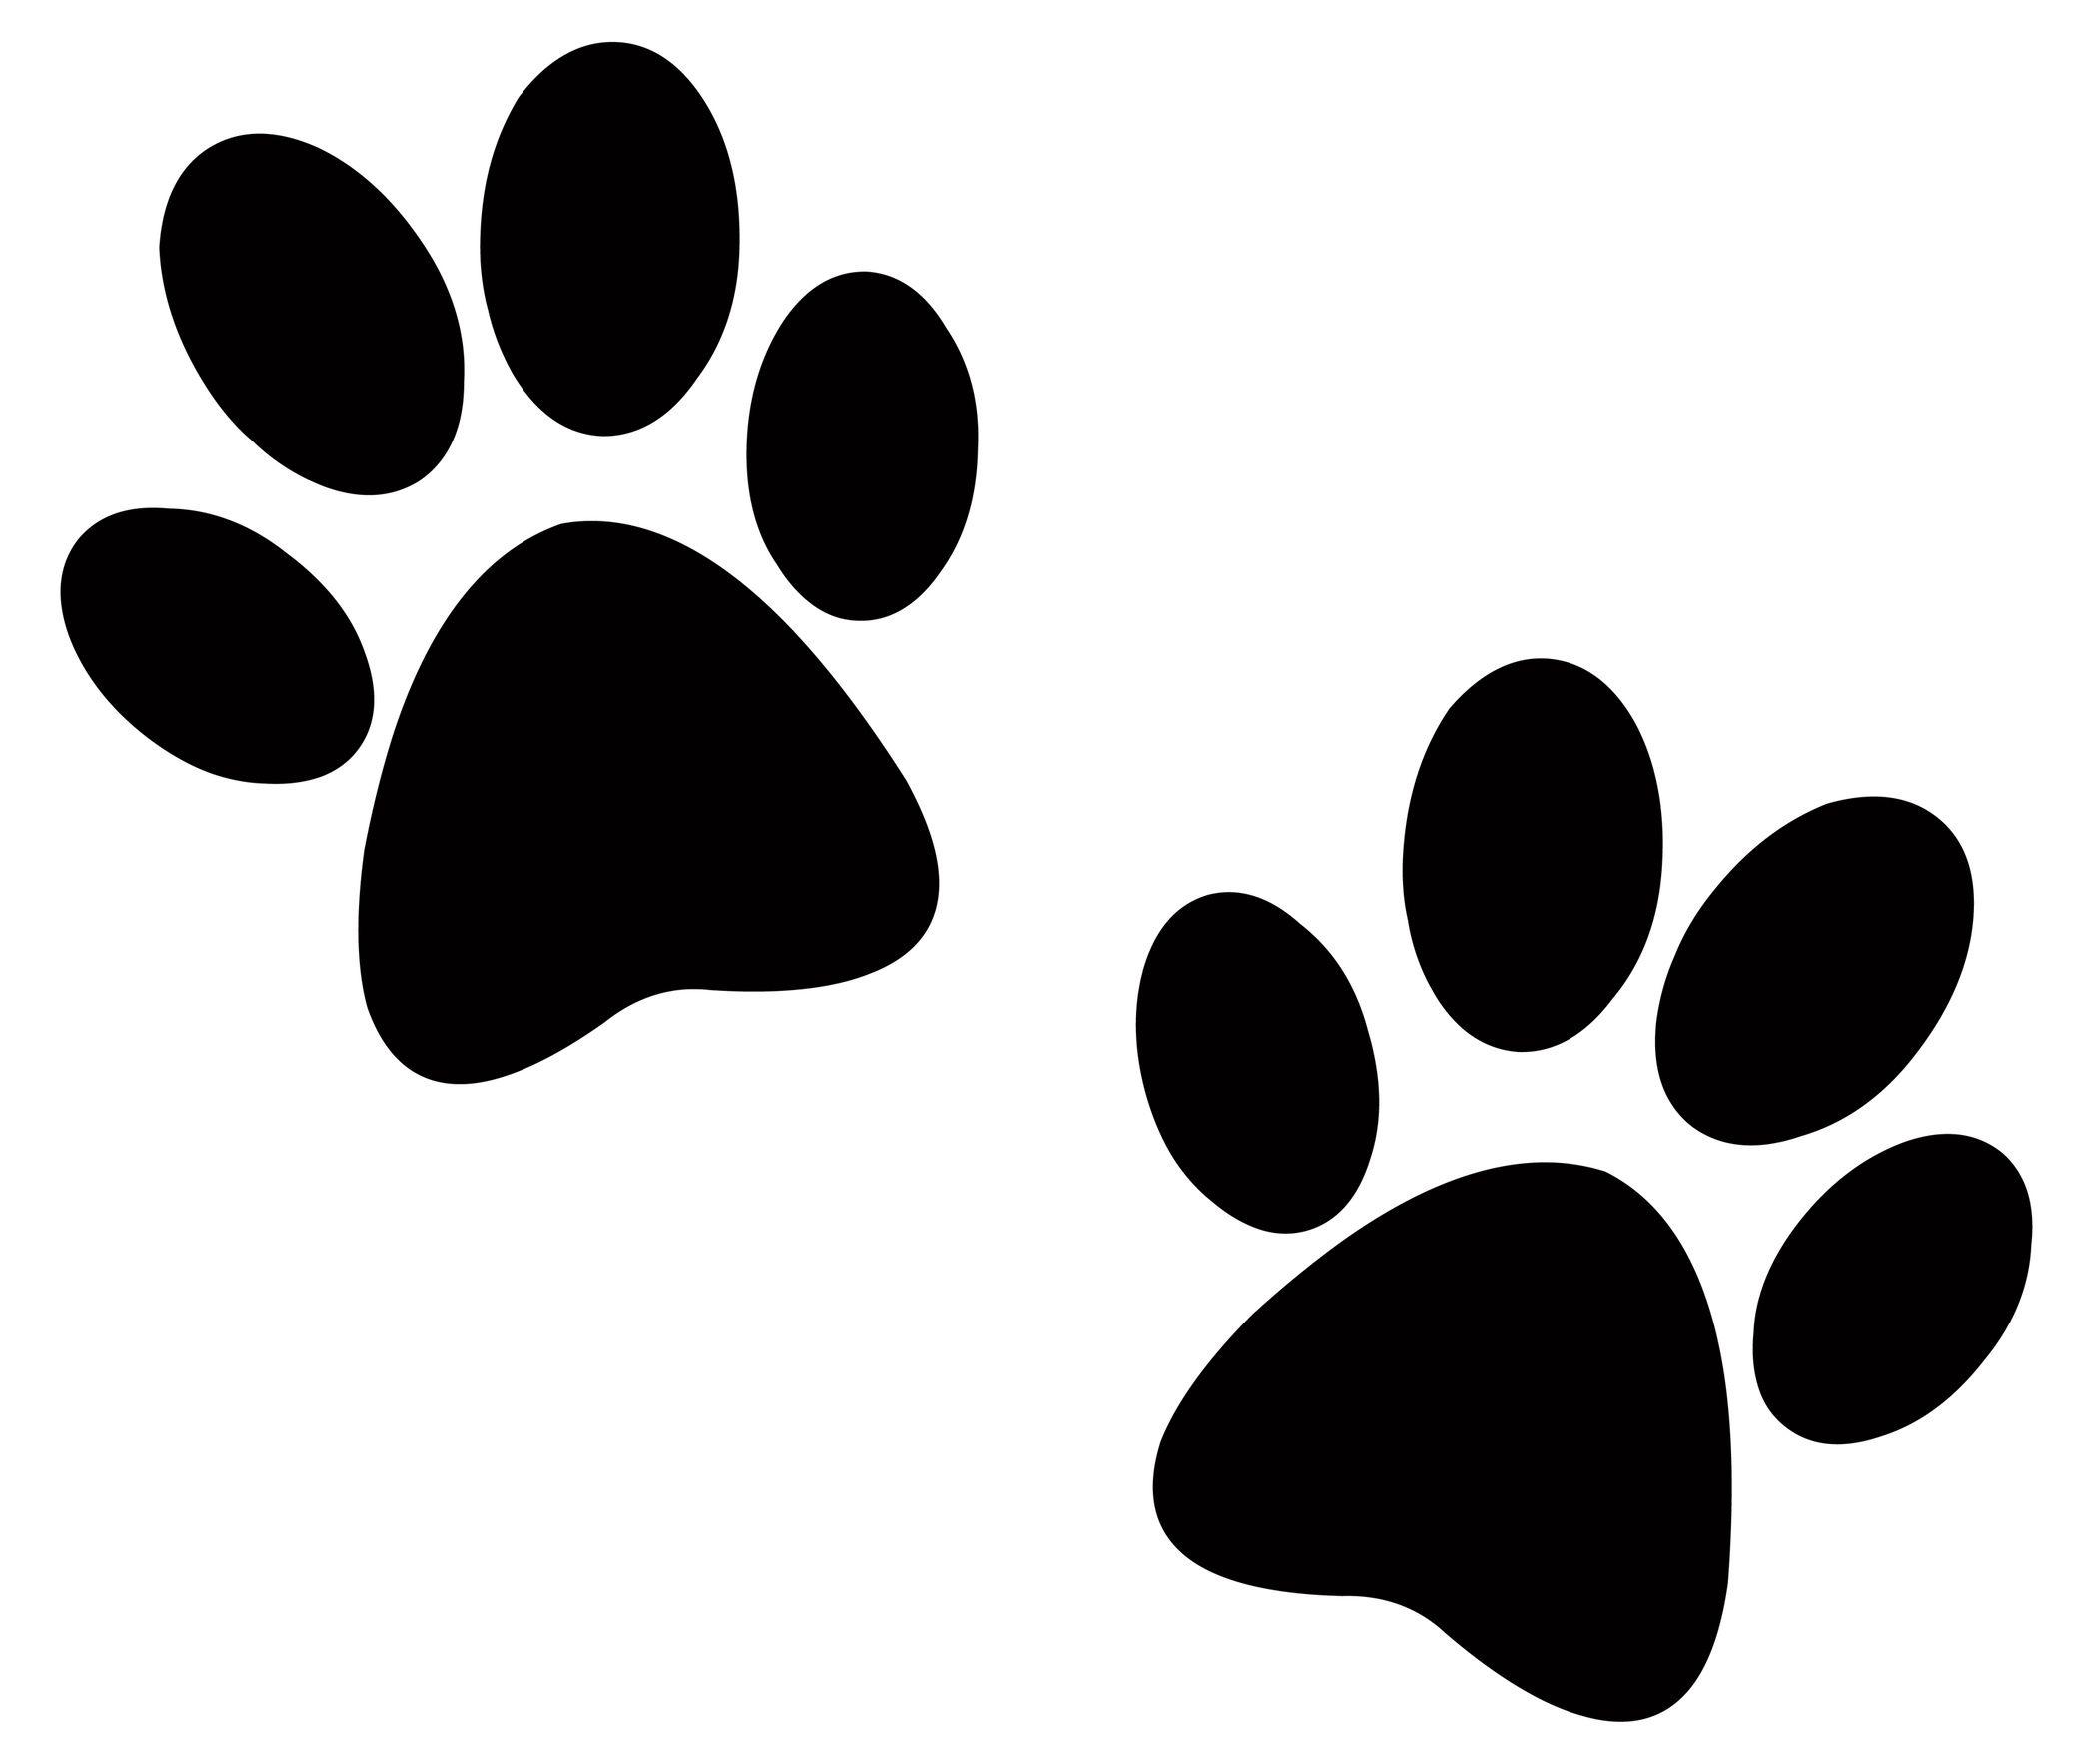 Puppy Paw Logo - Free Dog Paw Print, Download Free Clip Art, Free Clip Art on Clipart ...